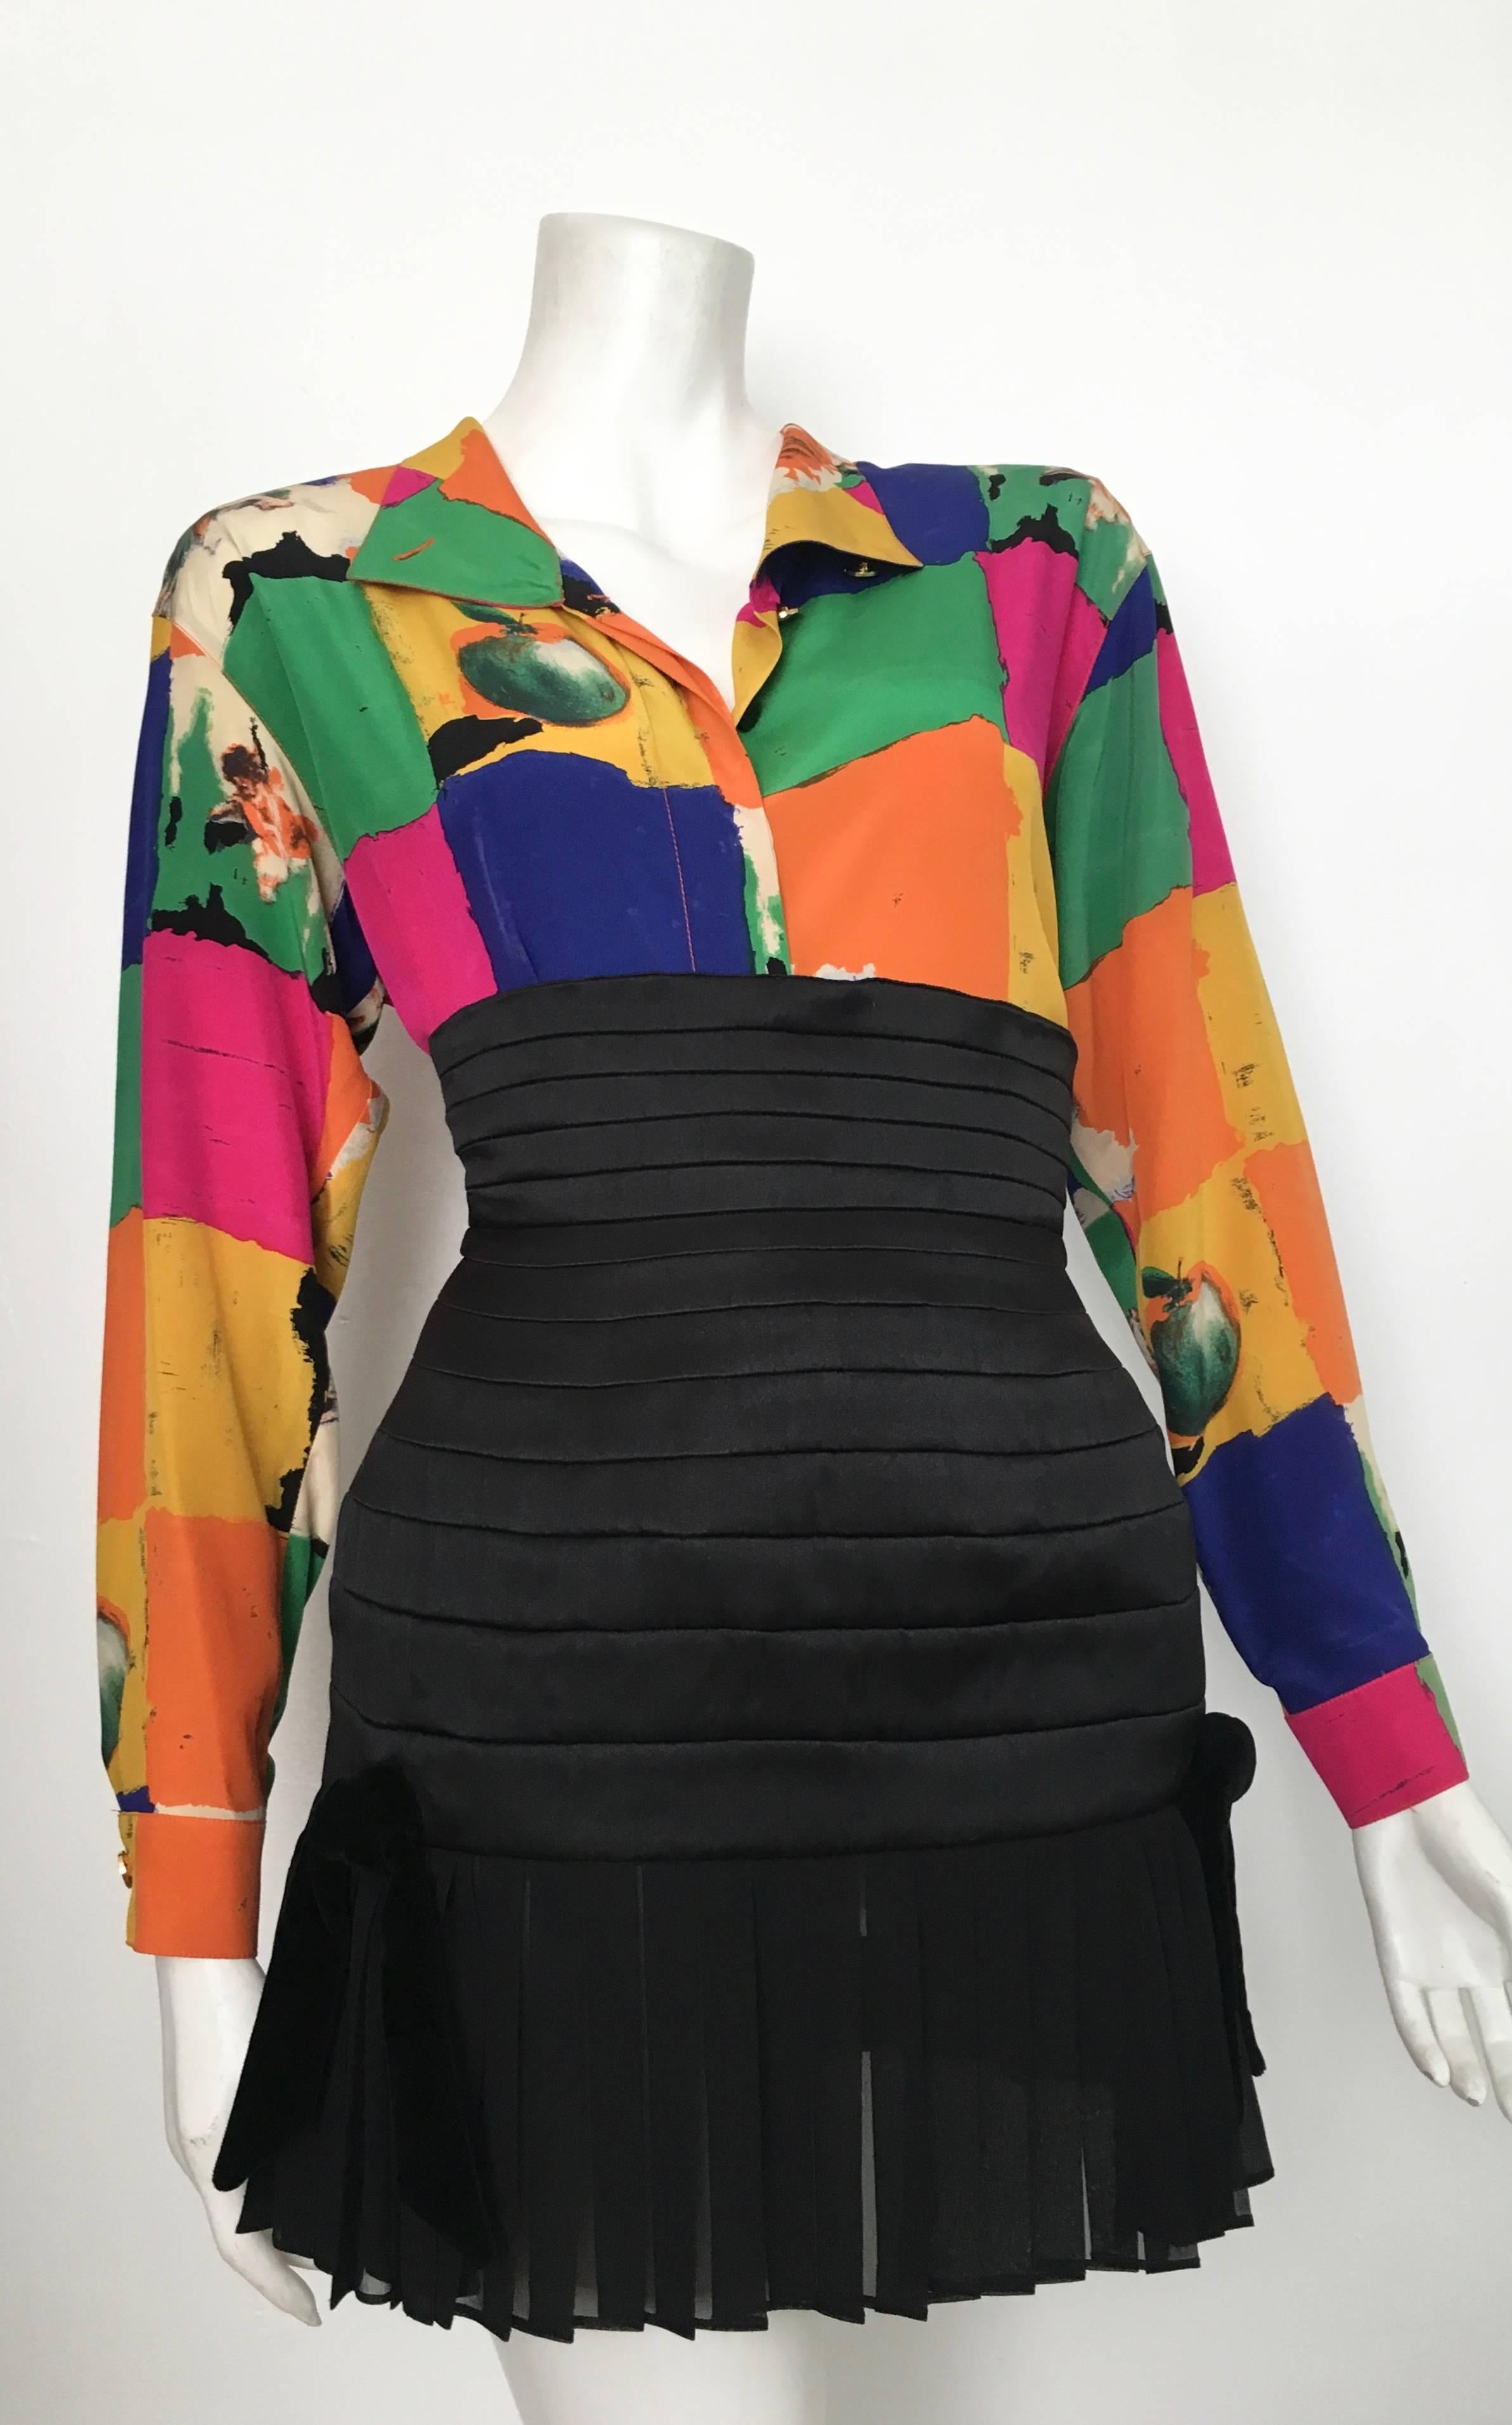 Emanuel Ungaro Parallele Paris 1980s colorful silk block pattern with cherubs & fruit images is a long sleeve abstract blouse size 4 but will also fit a size 6. This blouse is cut to be big and flowing. There are shoulder pads inside that can